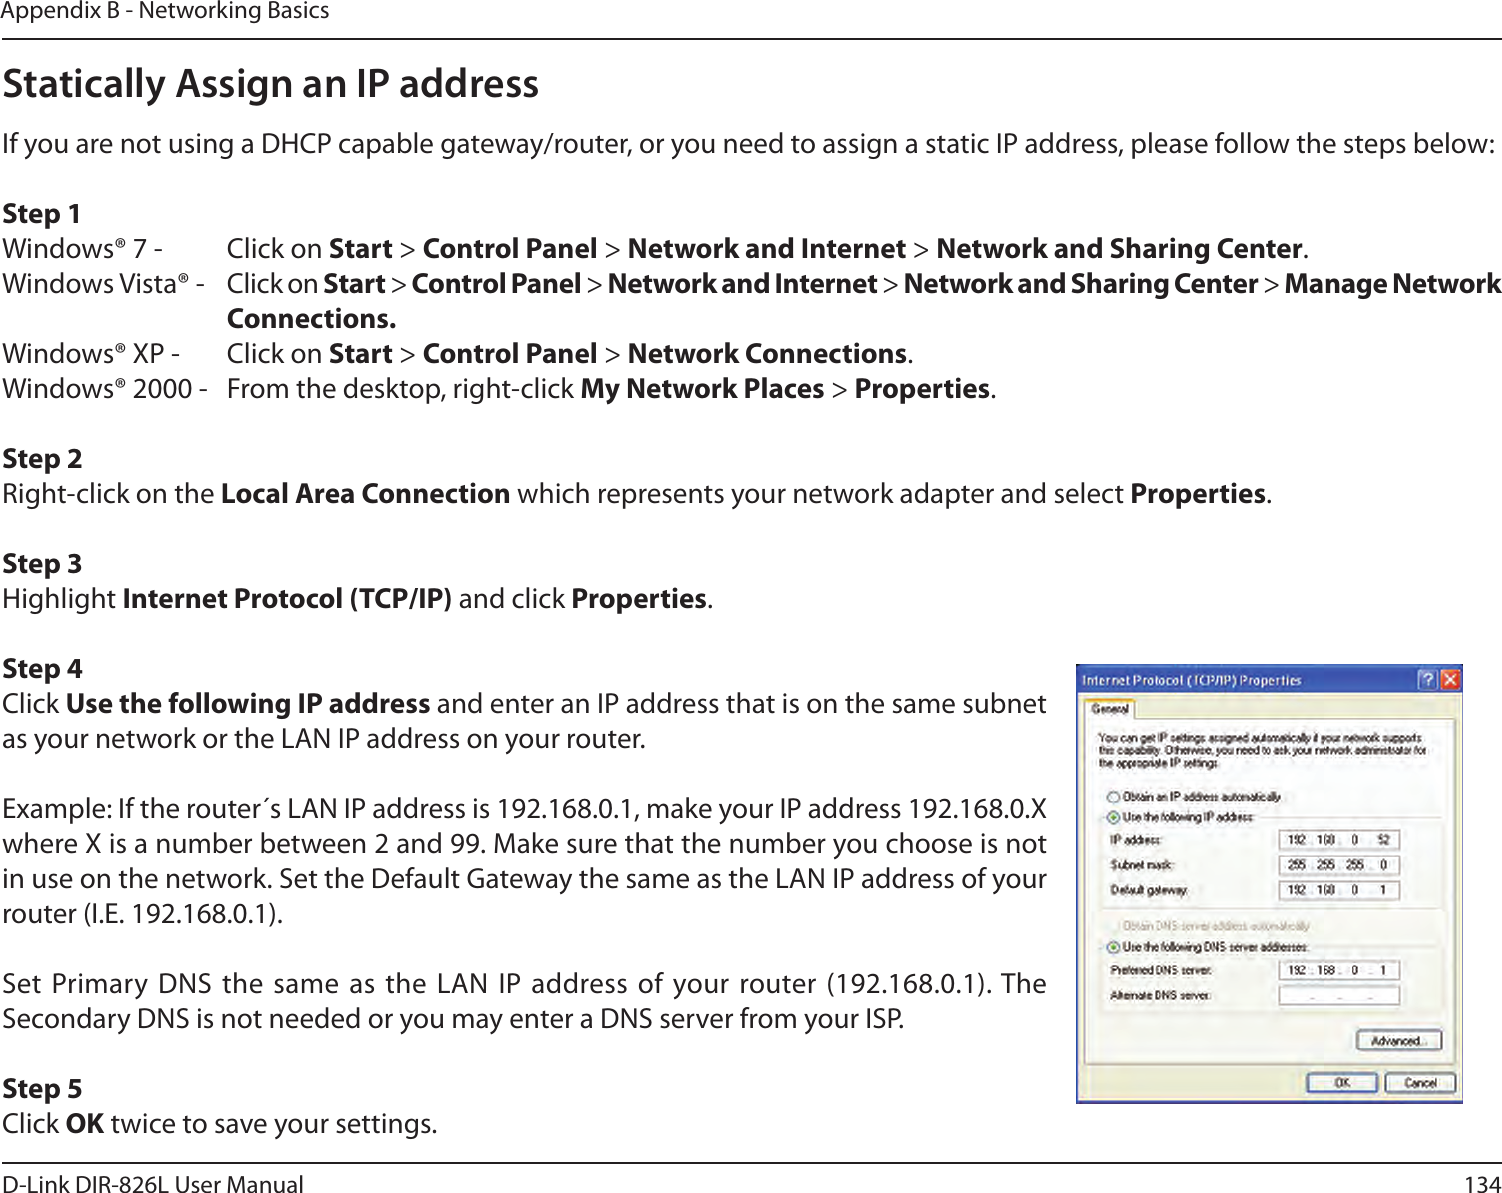 134D-Link DIR-826L User ManualAppendix B - Networking BasicsStatically Assign an IP addressIf you are not using a DHCP capable gateway/router, or you need to assign a static IP address, please follow the steps below:Step 1Windows® 7 -  Click on Start &gt; Control Panel &gt; Network and Internet &gt; Network and Sharing Center.Windows Vista® -  Click on Start &gt; Control Panel &gt; Network and Internet &gt; Network and Sharing Center &gt; Manage Network      Connections.Windows® XP -  Click on Start &gt; Control Panel &gt; Network Connections.Windows® 2000 -  From the desktop, right-click My Network Places &gt; Properties.Step 2Right-click on the Local Area Connection which represents your network adapter and select Properties.Step 3Highlight Internet Protocol (TCP/IP) and click Properties.Step 4Click Use the following IP address and enter an IP address that is on the same subnet as your network or the LAN IP address on your router. Example: If the router´s LAN IP address is 192.168.0.1, make your IP address 192.168.0.X where X is a number between 2 and 99. Make sure that the number you choose is not in use on the network. Set the Default Gateway the same as the LAN IP address of your router (I.E. 192.168.0.1). Set Primary  DNS  the  same as the LAN IP address of  your router (192.168.0.1). The Secondary DNS is not needed or you may enter a DNS server from your ISP.Step 5Click OK twice to save your settings.